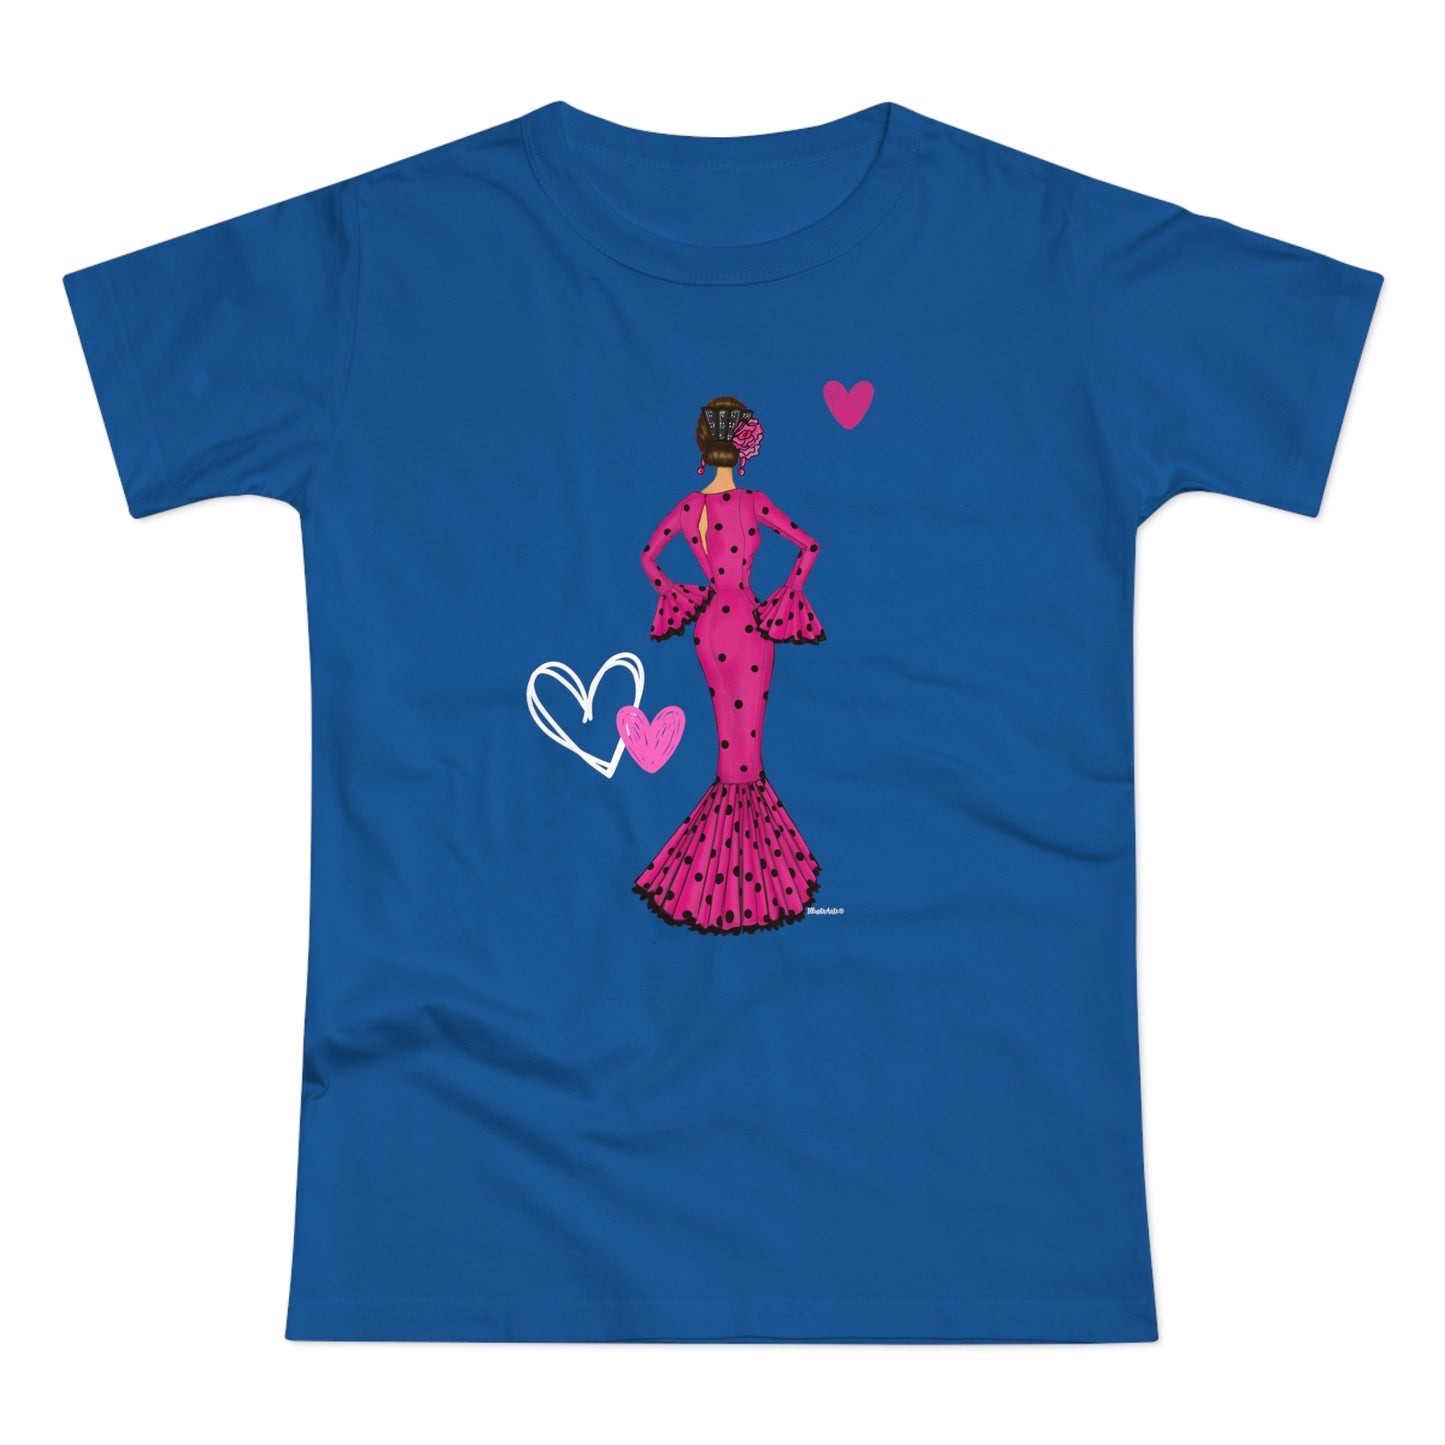 a blue t - shirt with a woman in a pink dress holding a heart